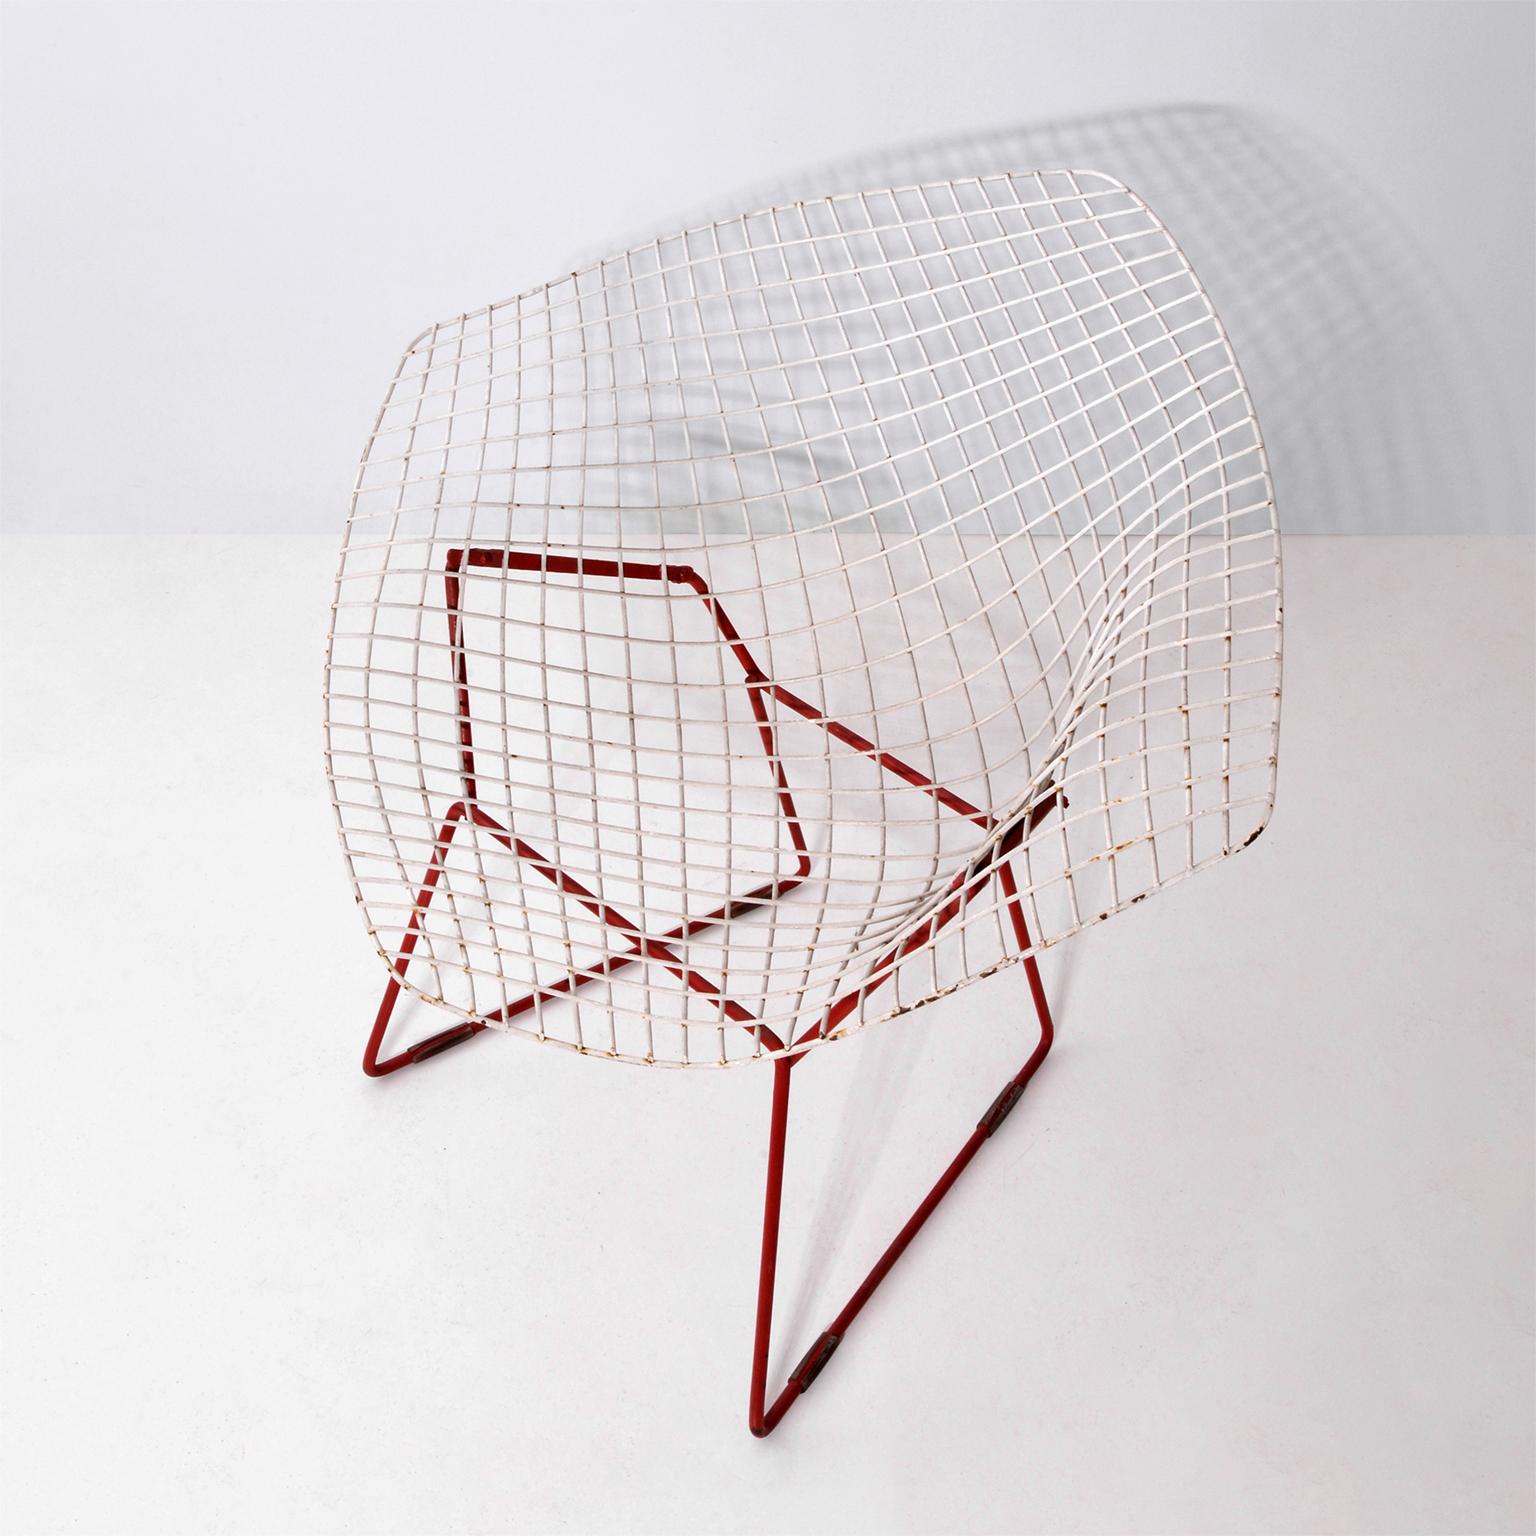 Mid-Century Modern Early Diamond Chair by Harry Bertoia, White and Dark Red Enameled Metal, c. 1956 For Sale